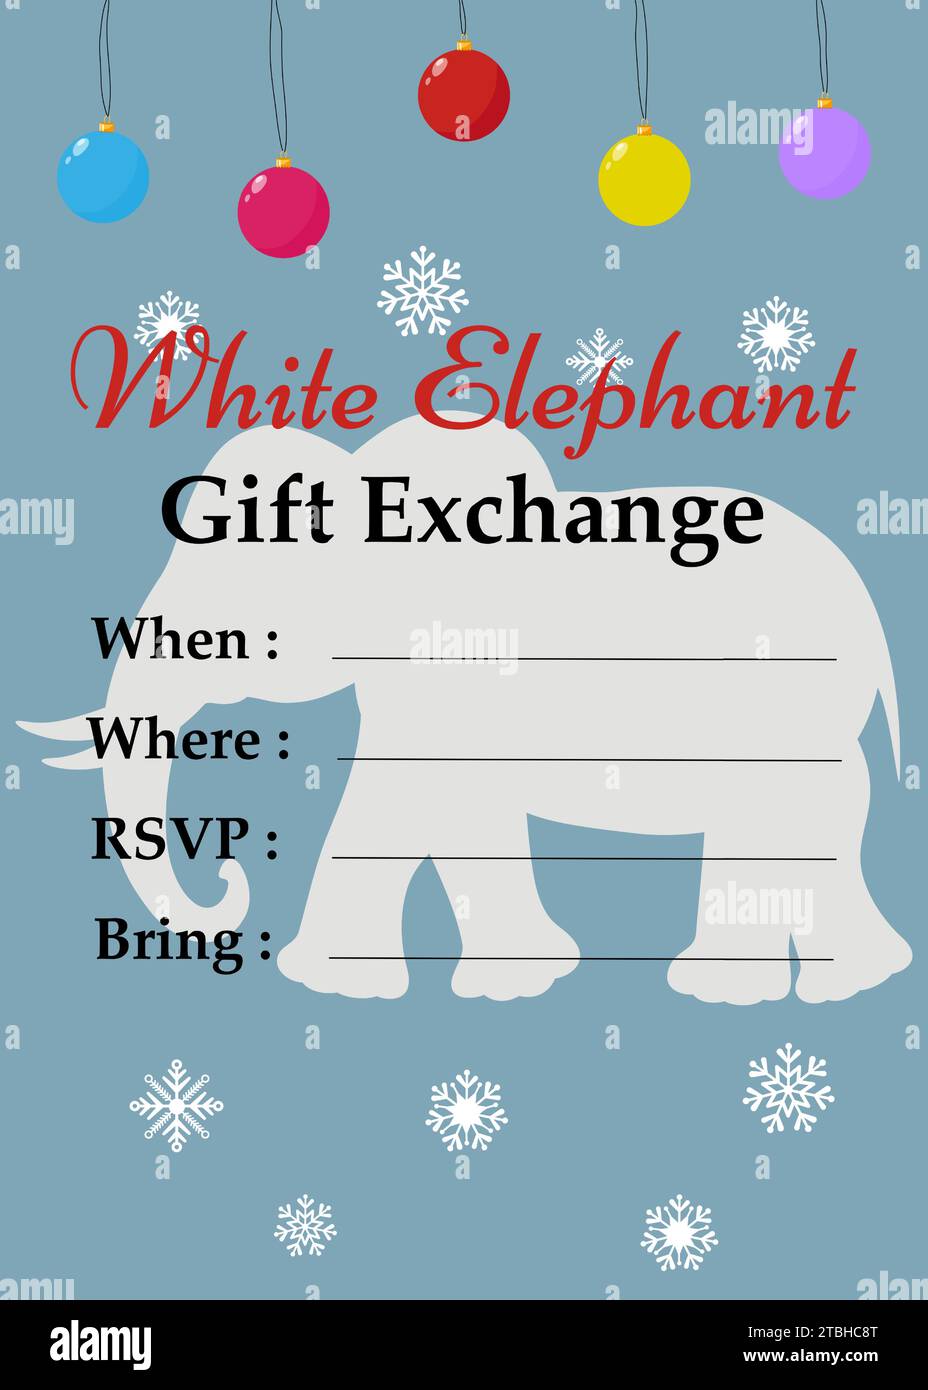 https://c8.alamy.com/comp/2TBHC8T/white-elephant-gift-exchange-gift-exchange-game-for-christmas-white-elephant-invitation-fun-and-modern-party-invitation-template-vector-illustratio-2TBHC8T.jpg